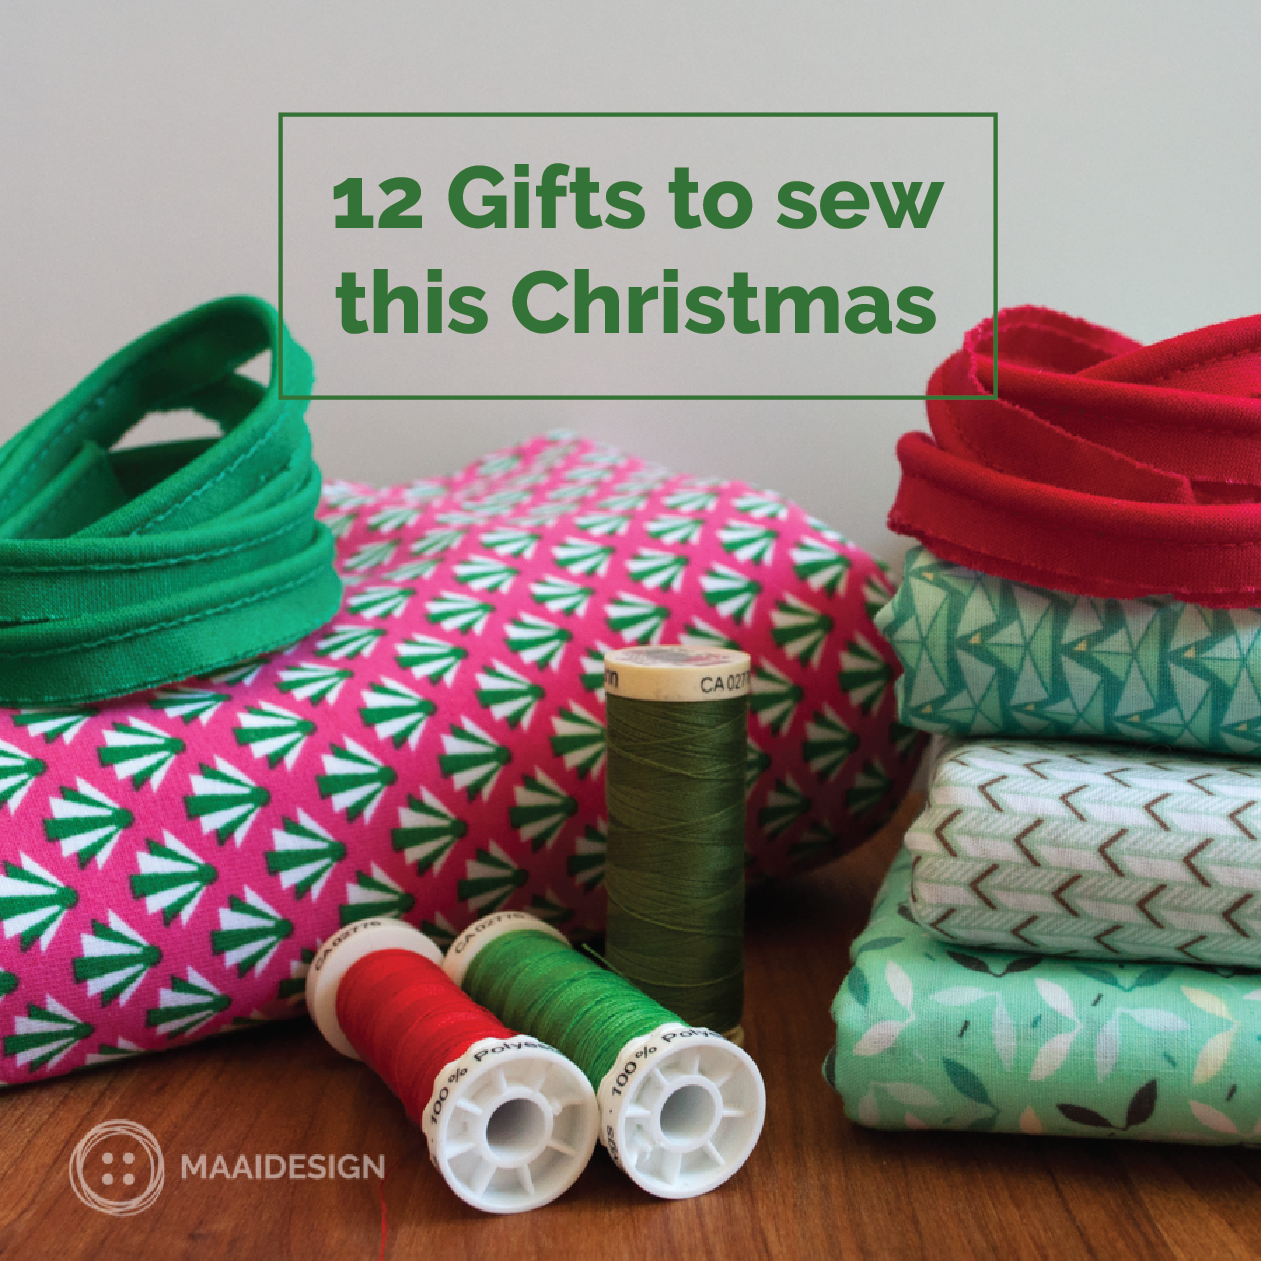 12 Gifts to sew this Christmas